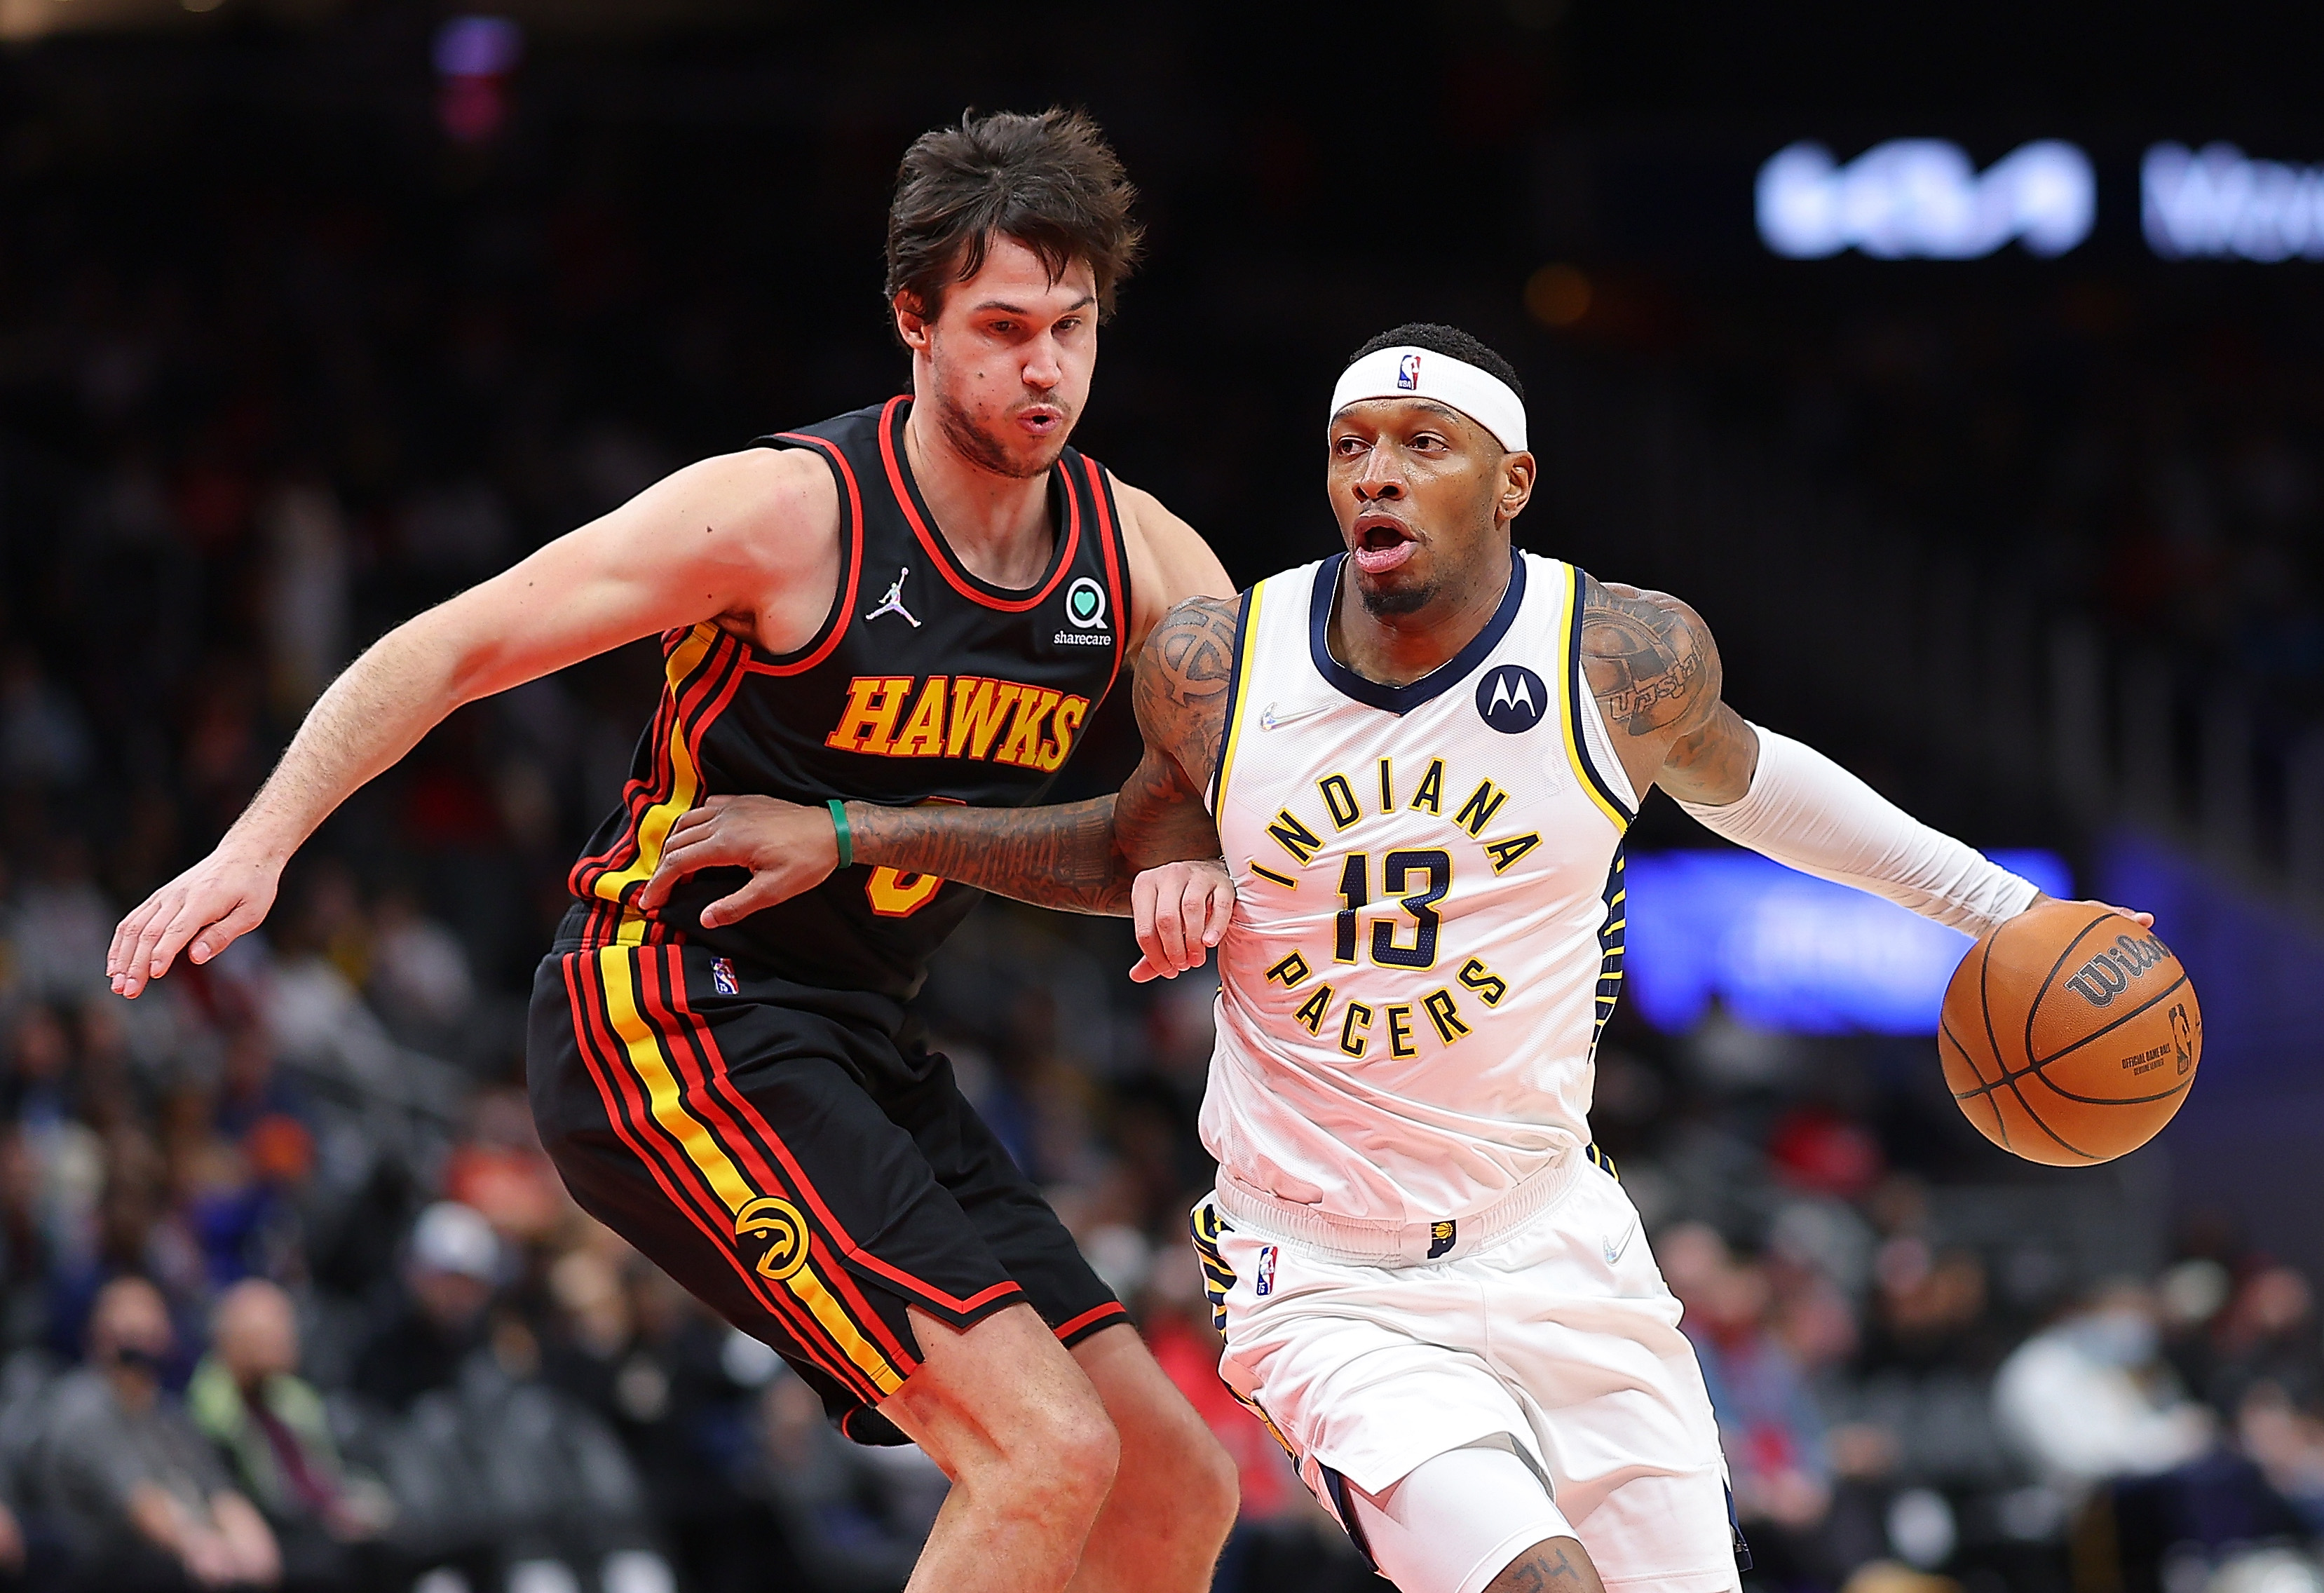 Torrey Craig #13 of the Indiana Pacers drives against Danilo Gallinari #8 of the Atlanta Hawks during the first half at State Farm Arena on February 08, 2022 in Atlanta, Georgia.